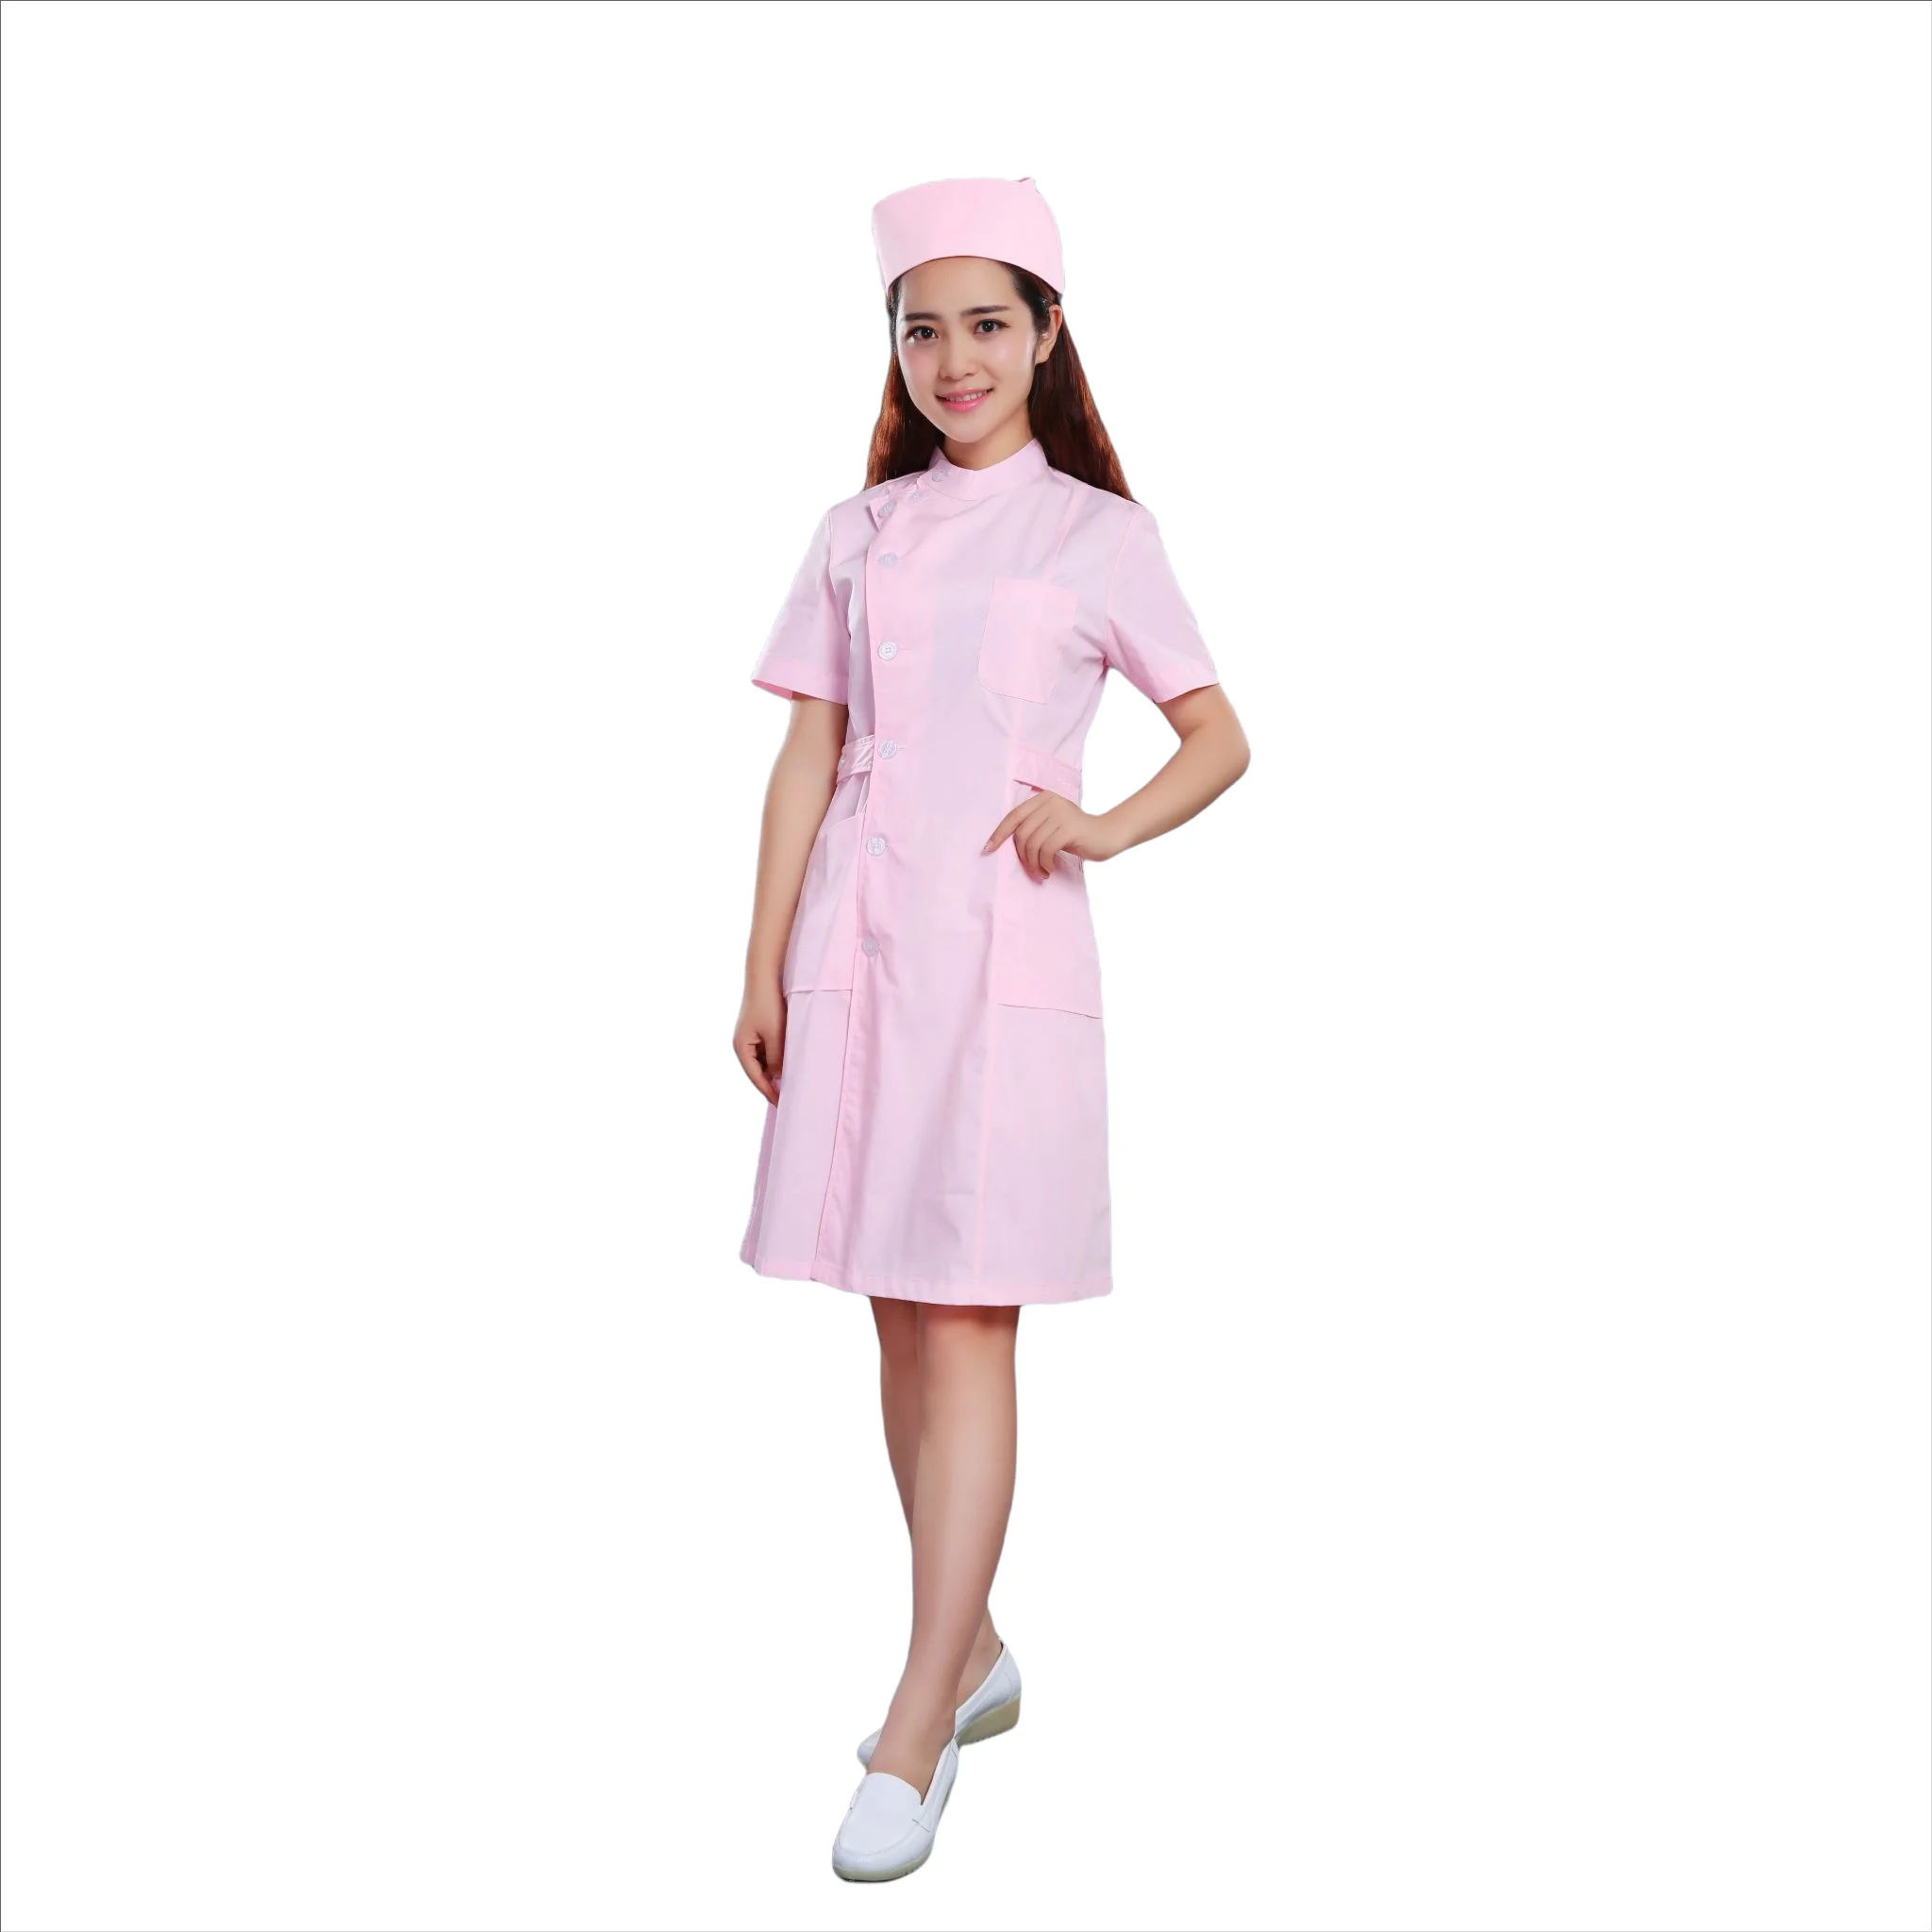 HOSPRIQS Nurse Uniform with Normal length half sleeves top with 2 pockets  Regular fit pant two side pockets- Ideals for Hospital Staff/clinics/Nanny  Uniforms (Small, PEACOCK BLUE) : Amazon.in: Clothing & Accessories